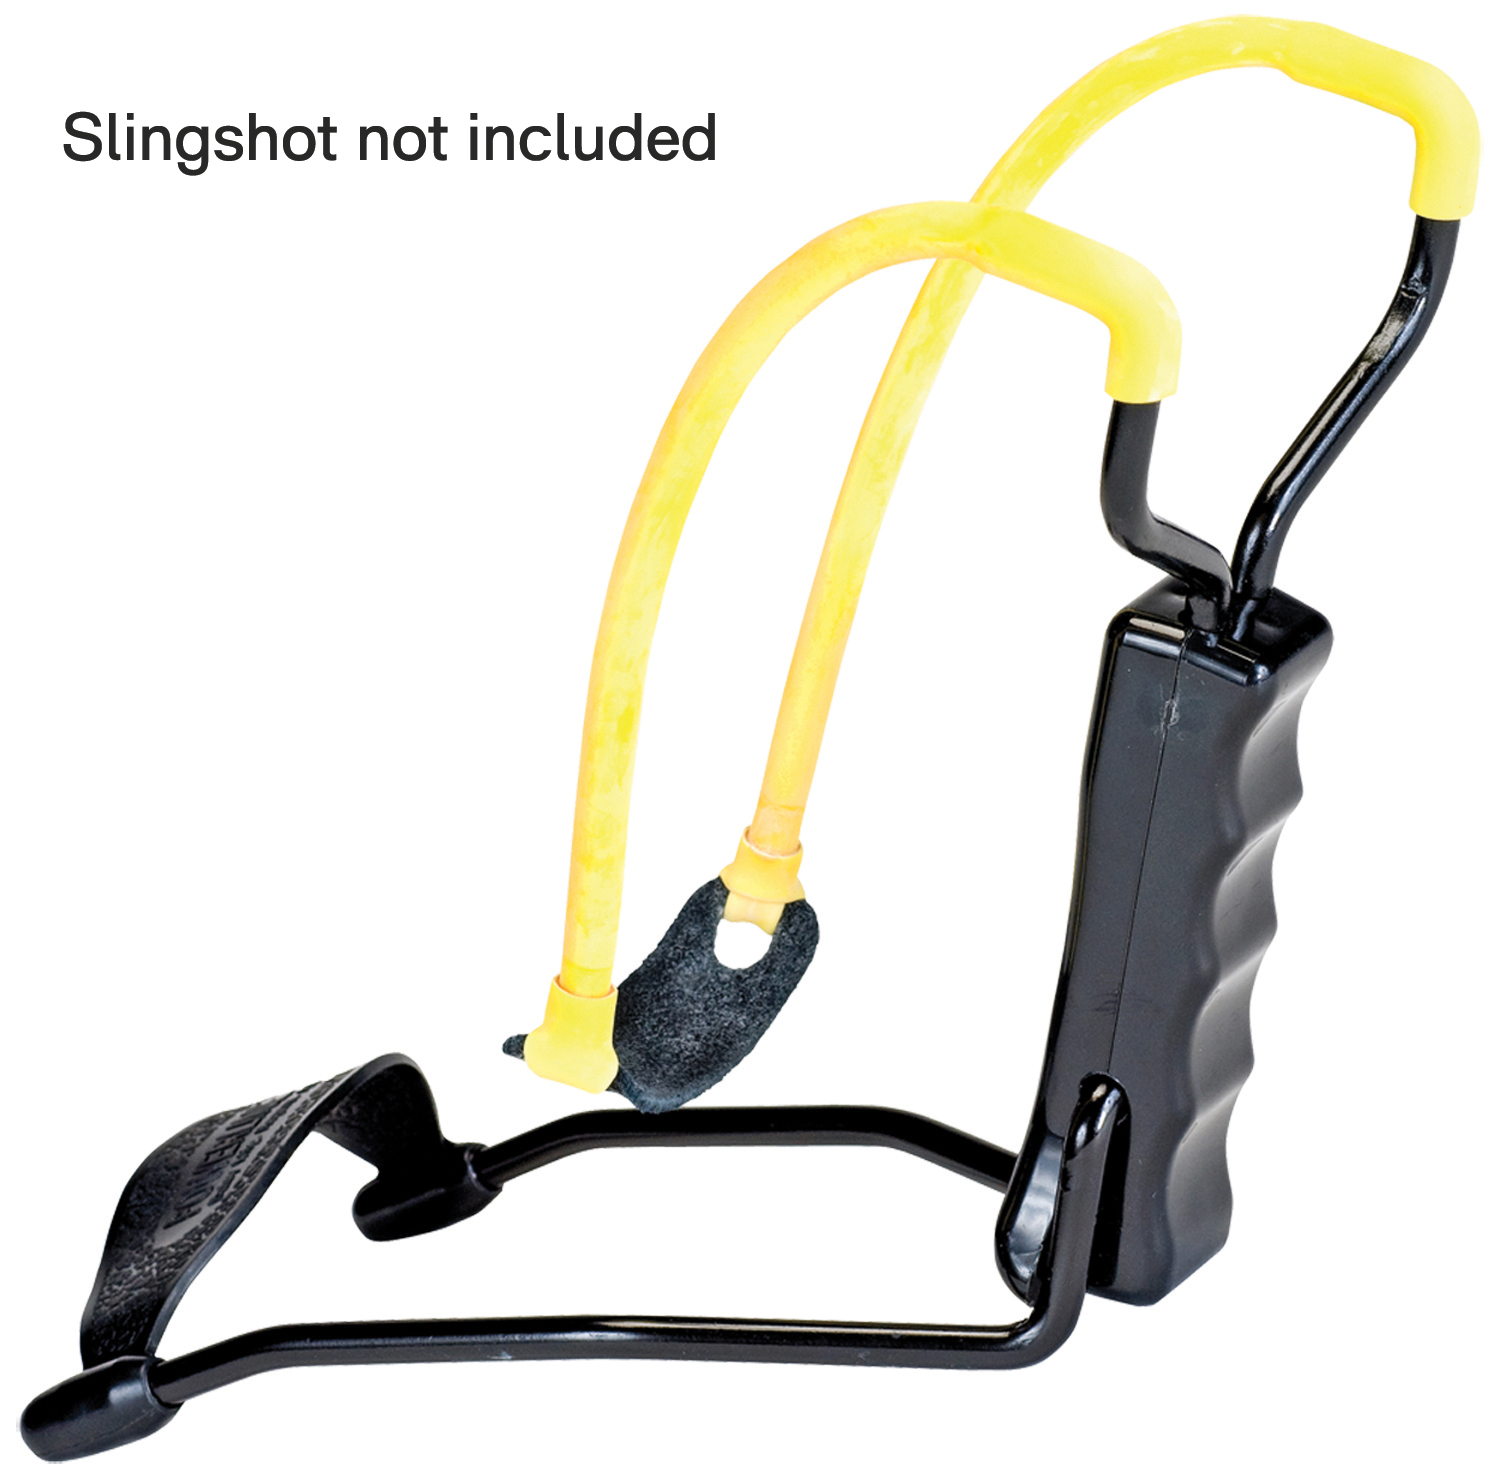 Daisy Slingshot Replacement Sports Rubber Band for Daisy Slingshots - image 4 of 5